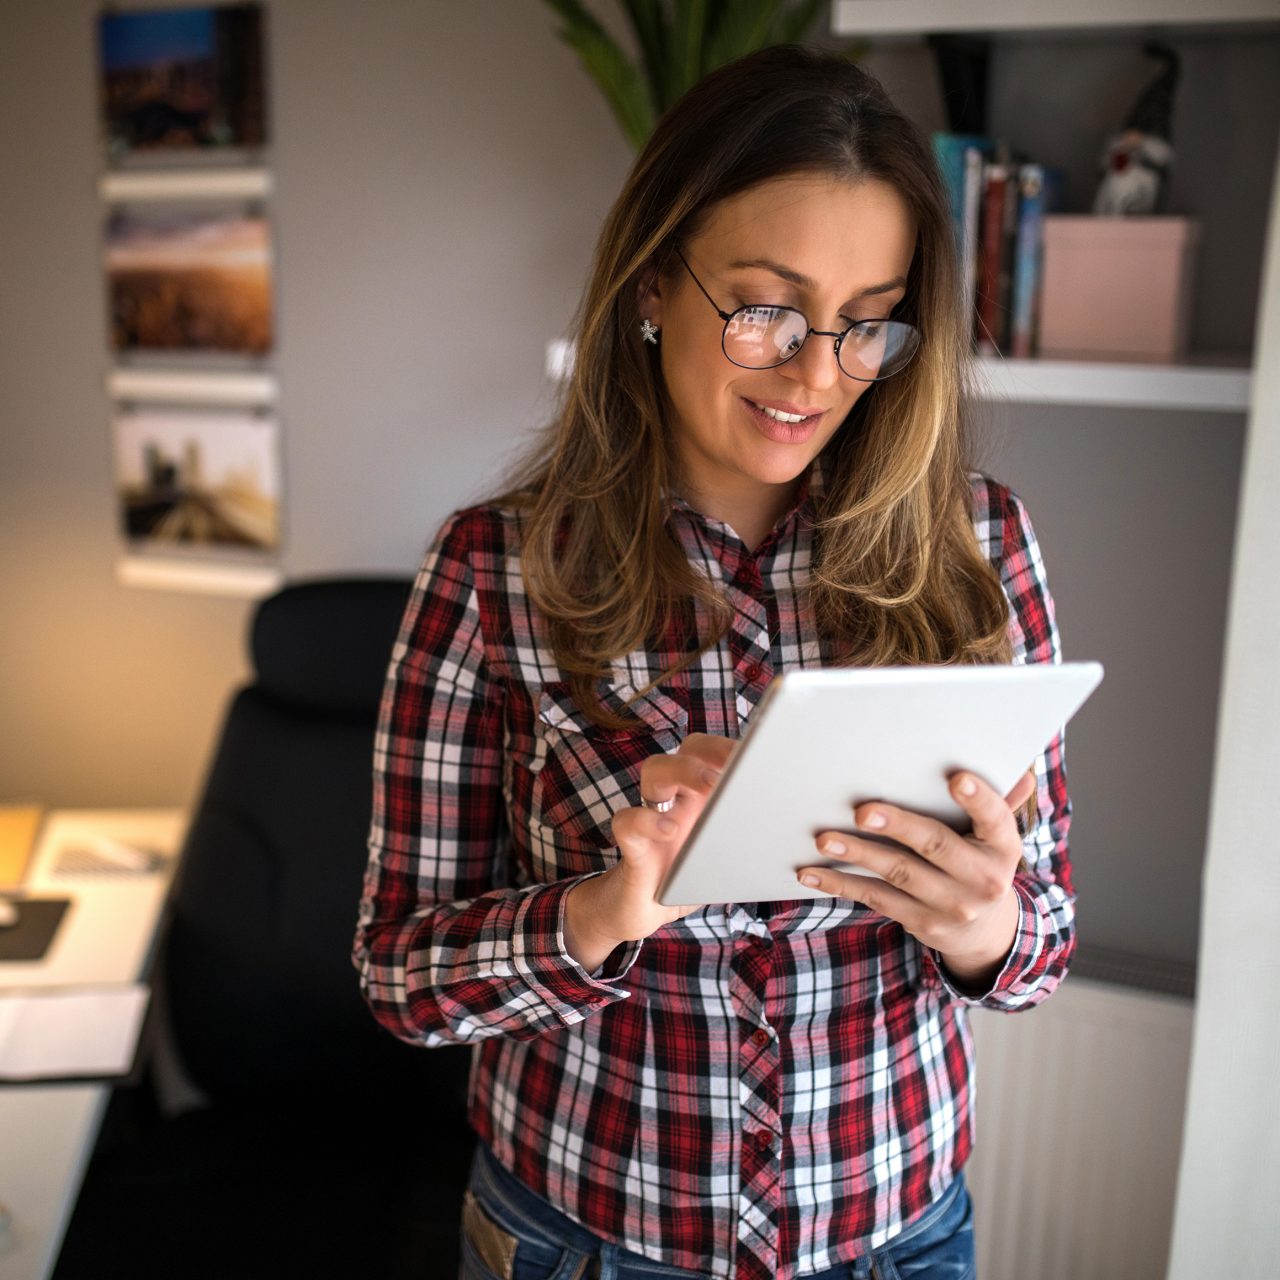 Woman in home office standing on tablet